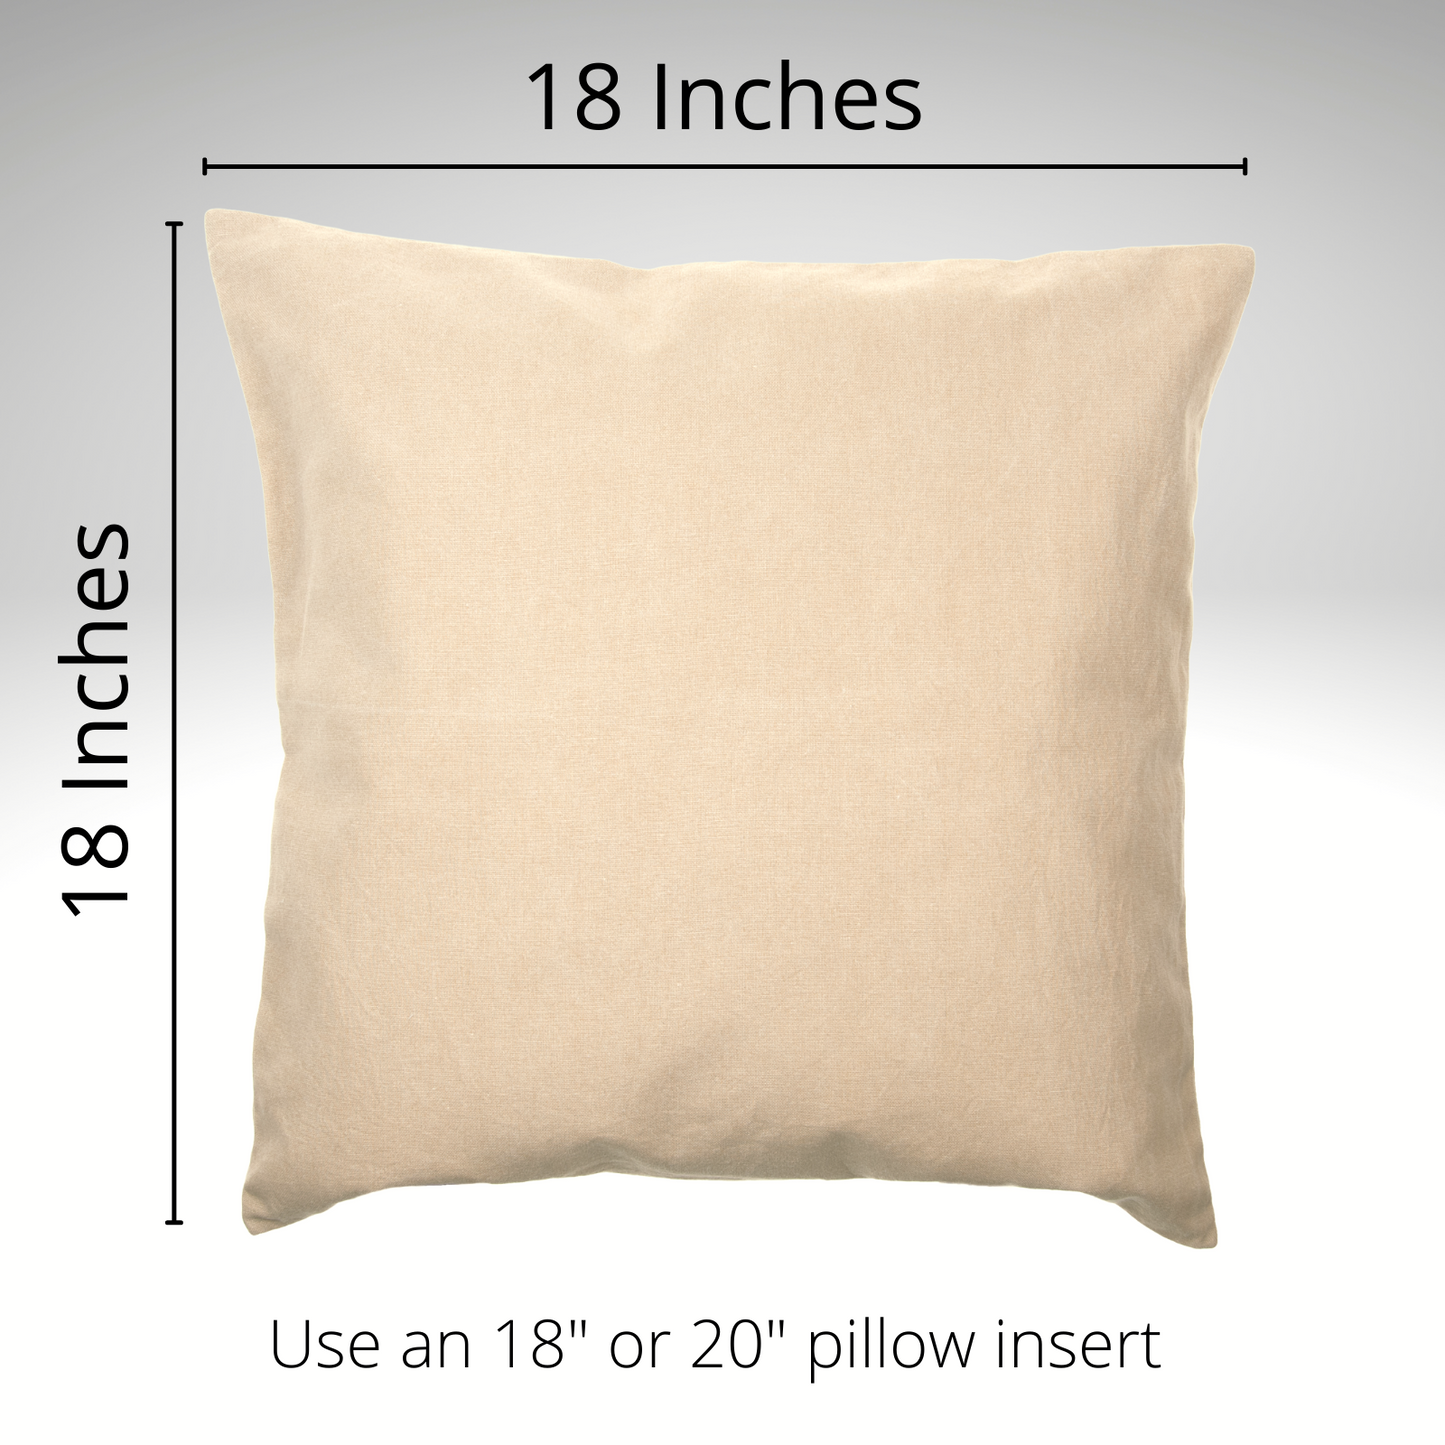 Fall Blessings Pillow Cover